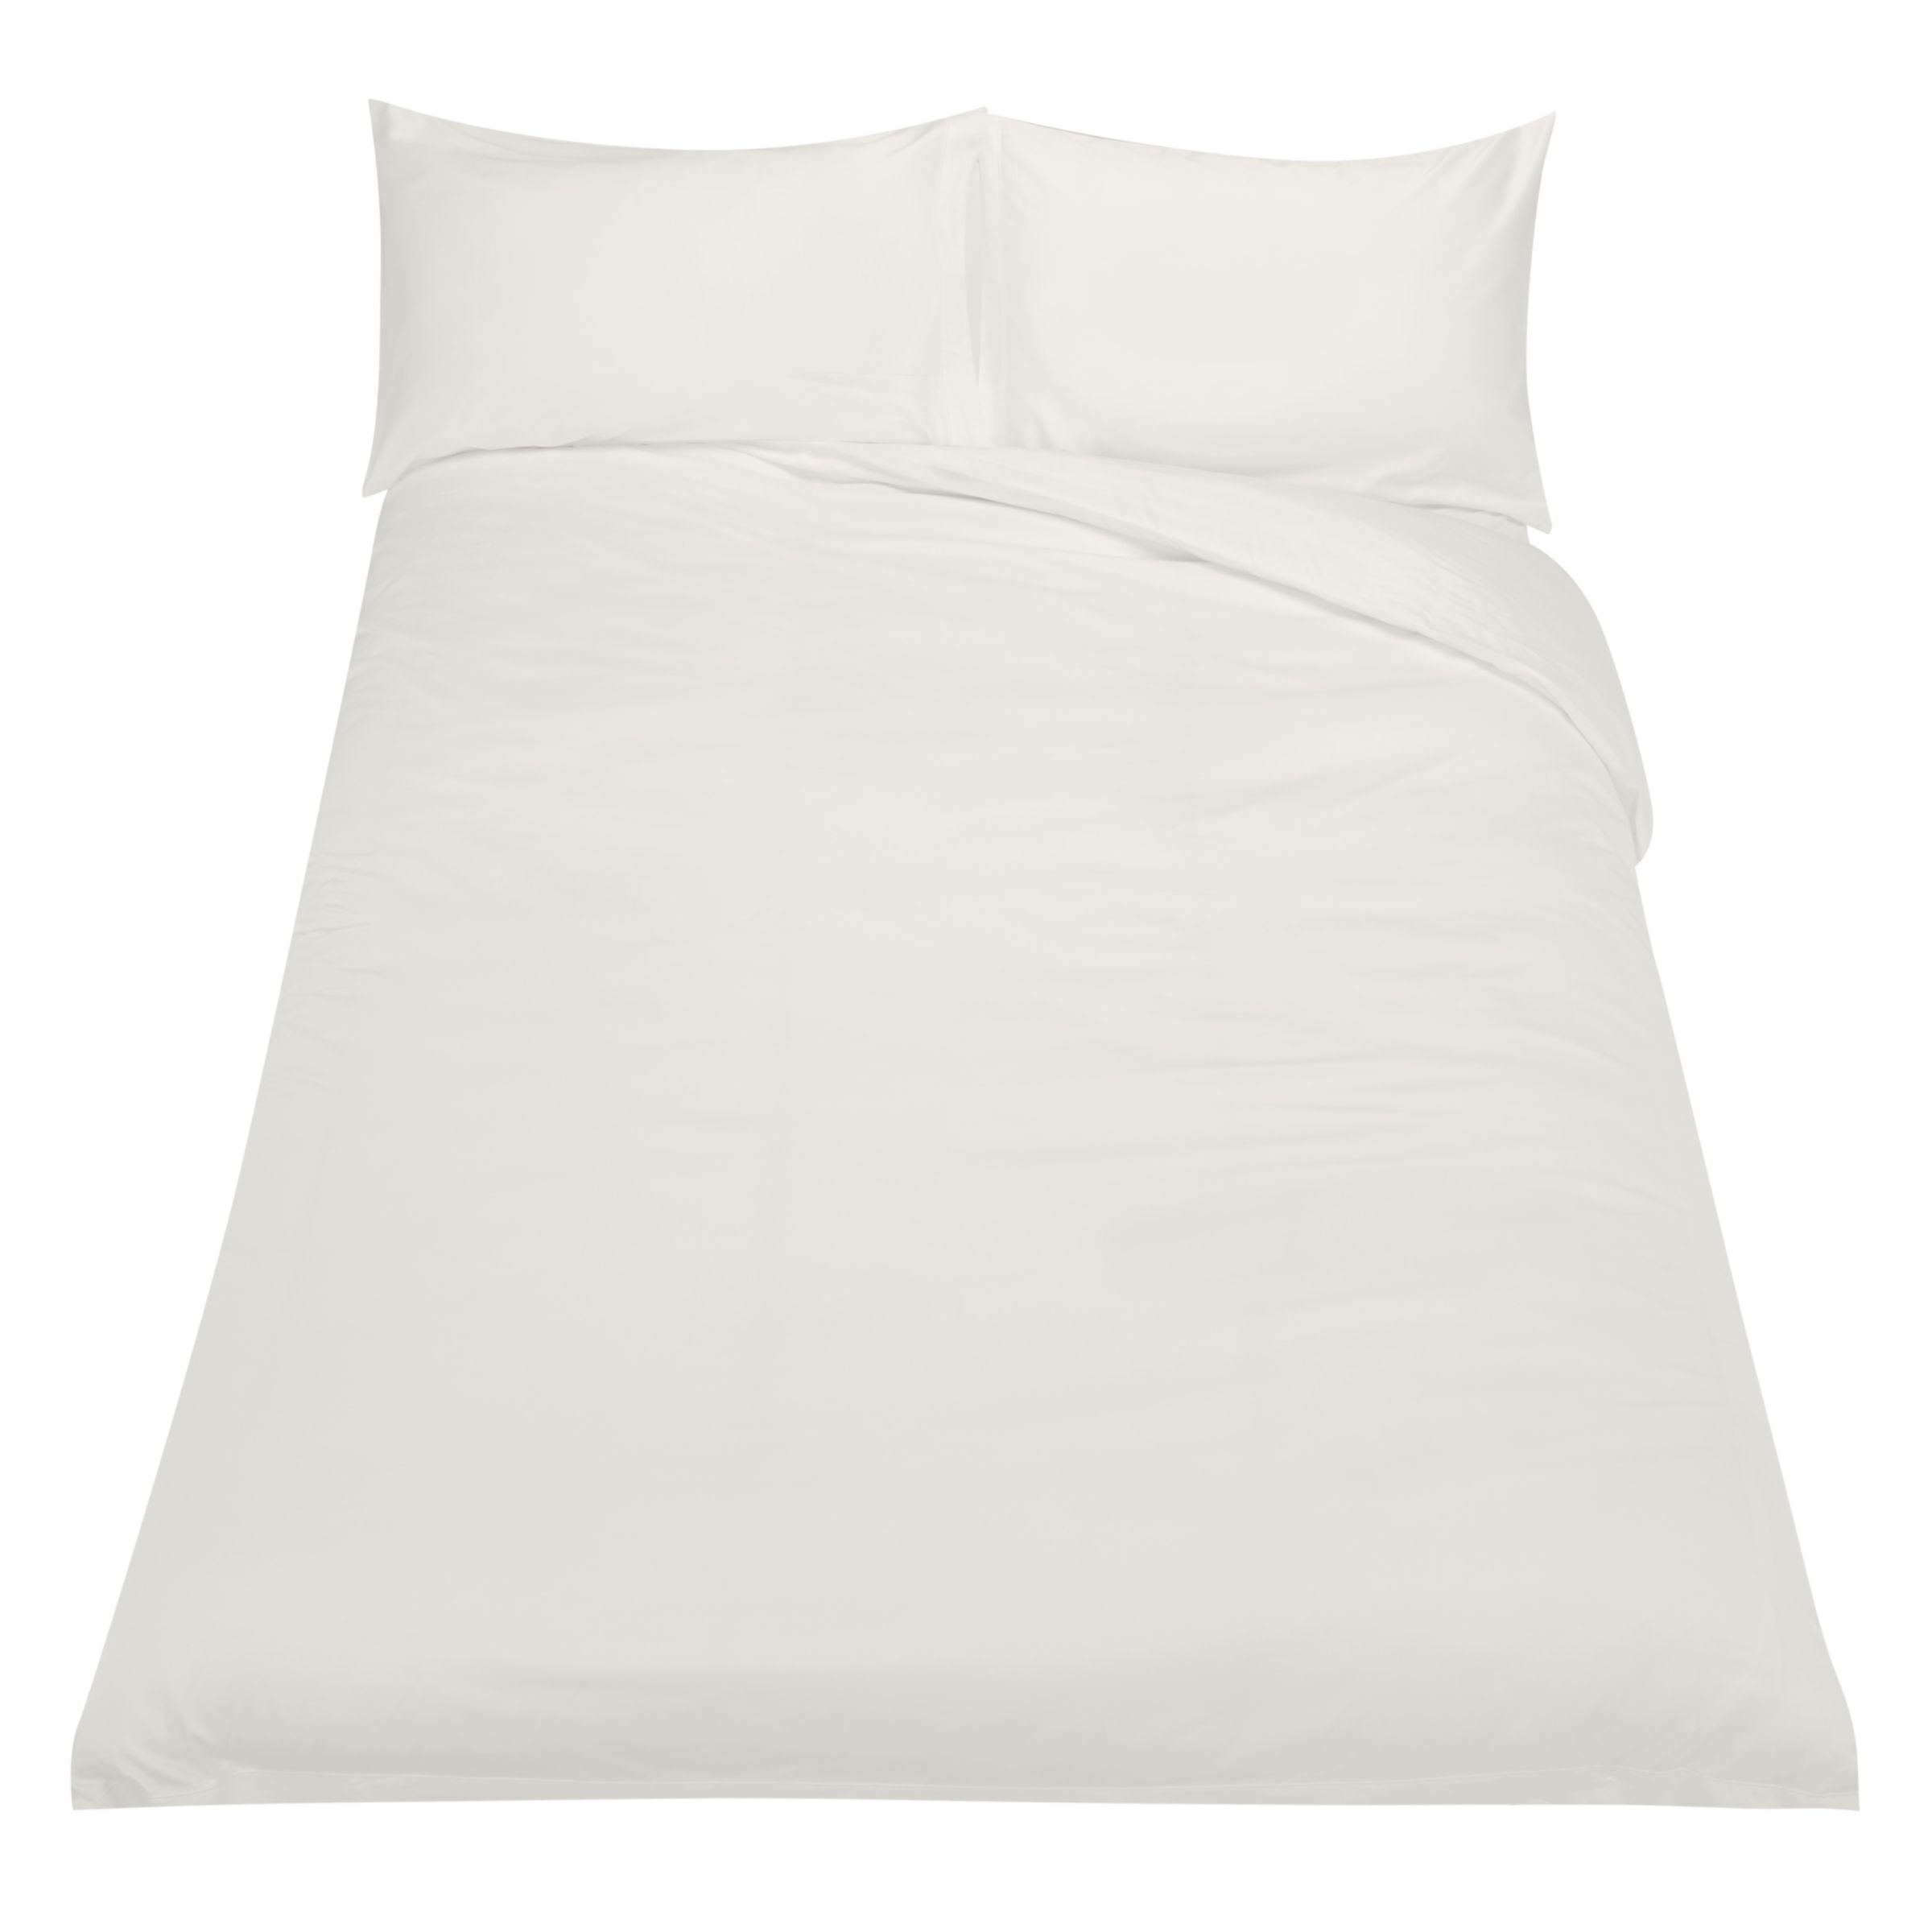 John Lewis Special Buy Soft and Silky 400 Thread Count Cotton Satin Duvet Cover Set